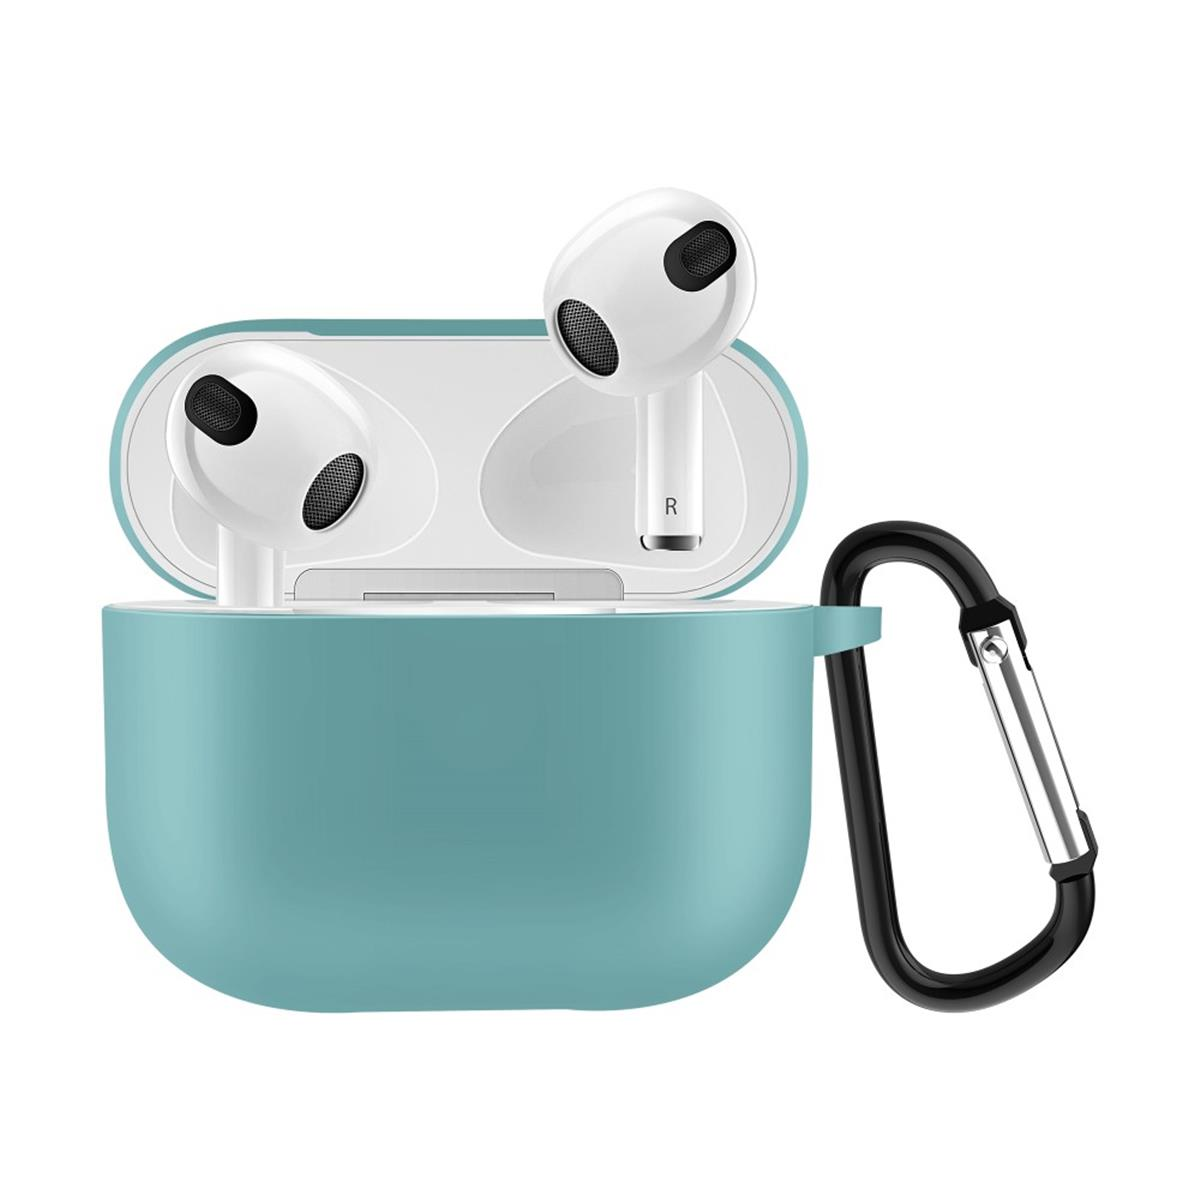 COVERKINGZ AirPods Unisex, Grün, Silikoncover Apple Ladecase für 3 76810